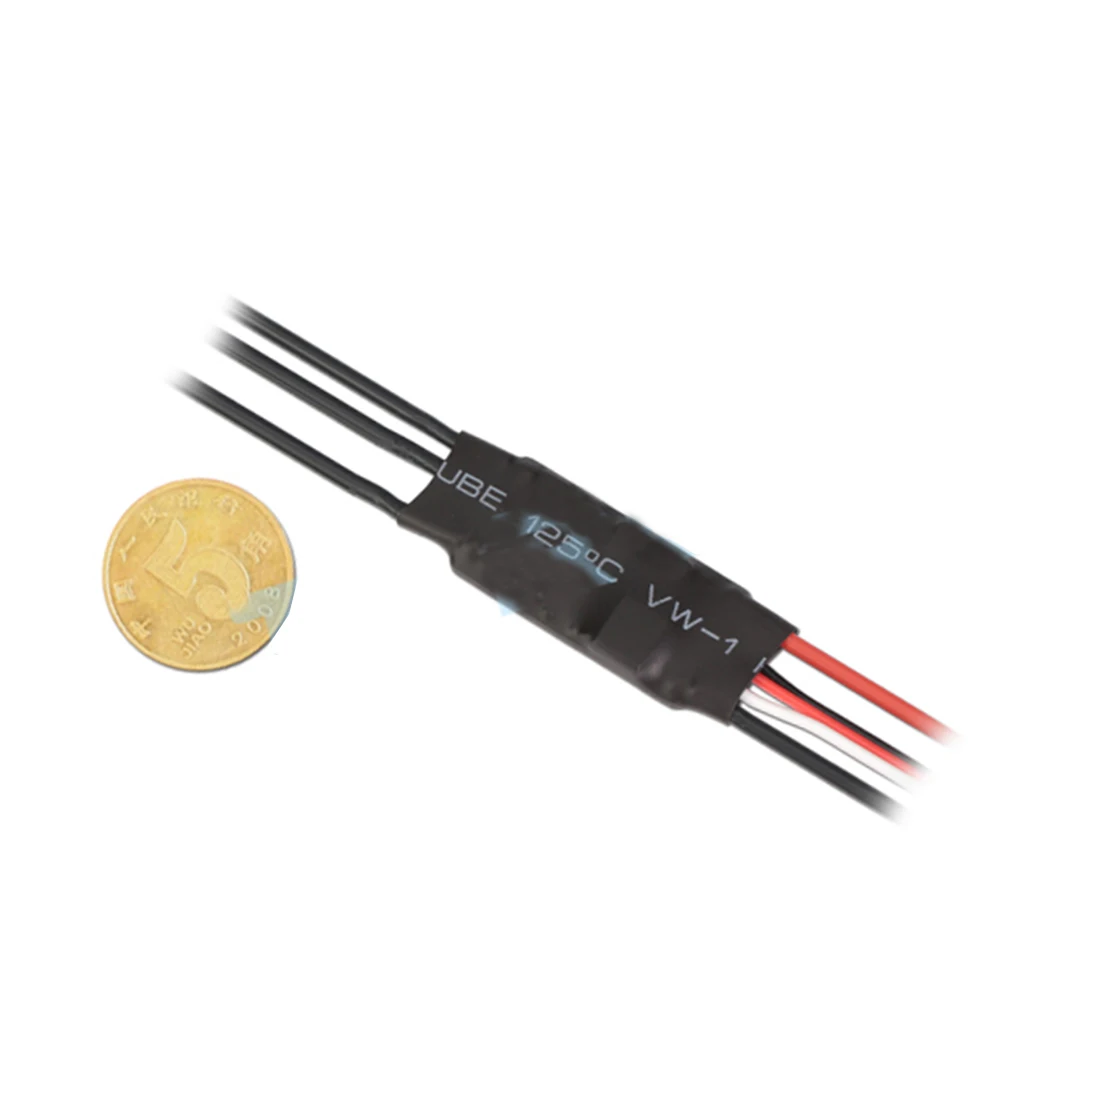 

Tarot 12A Mini ESC with BEC TL300G3 multi-rotor Electric Speed Controller for Drone Quadrocopter